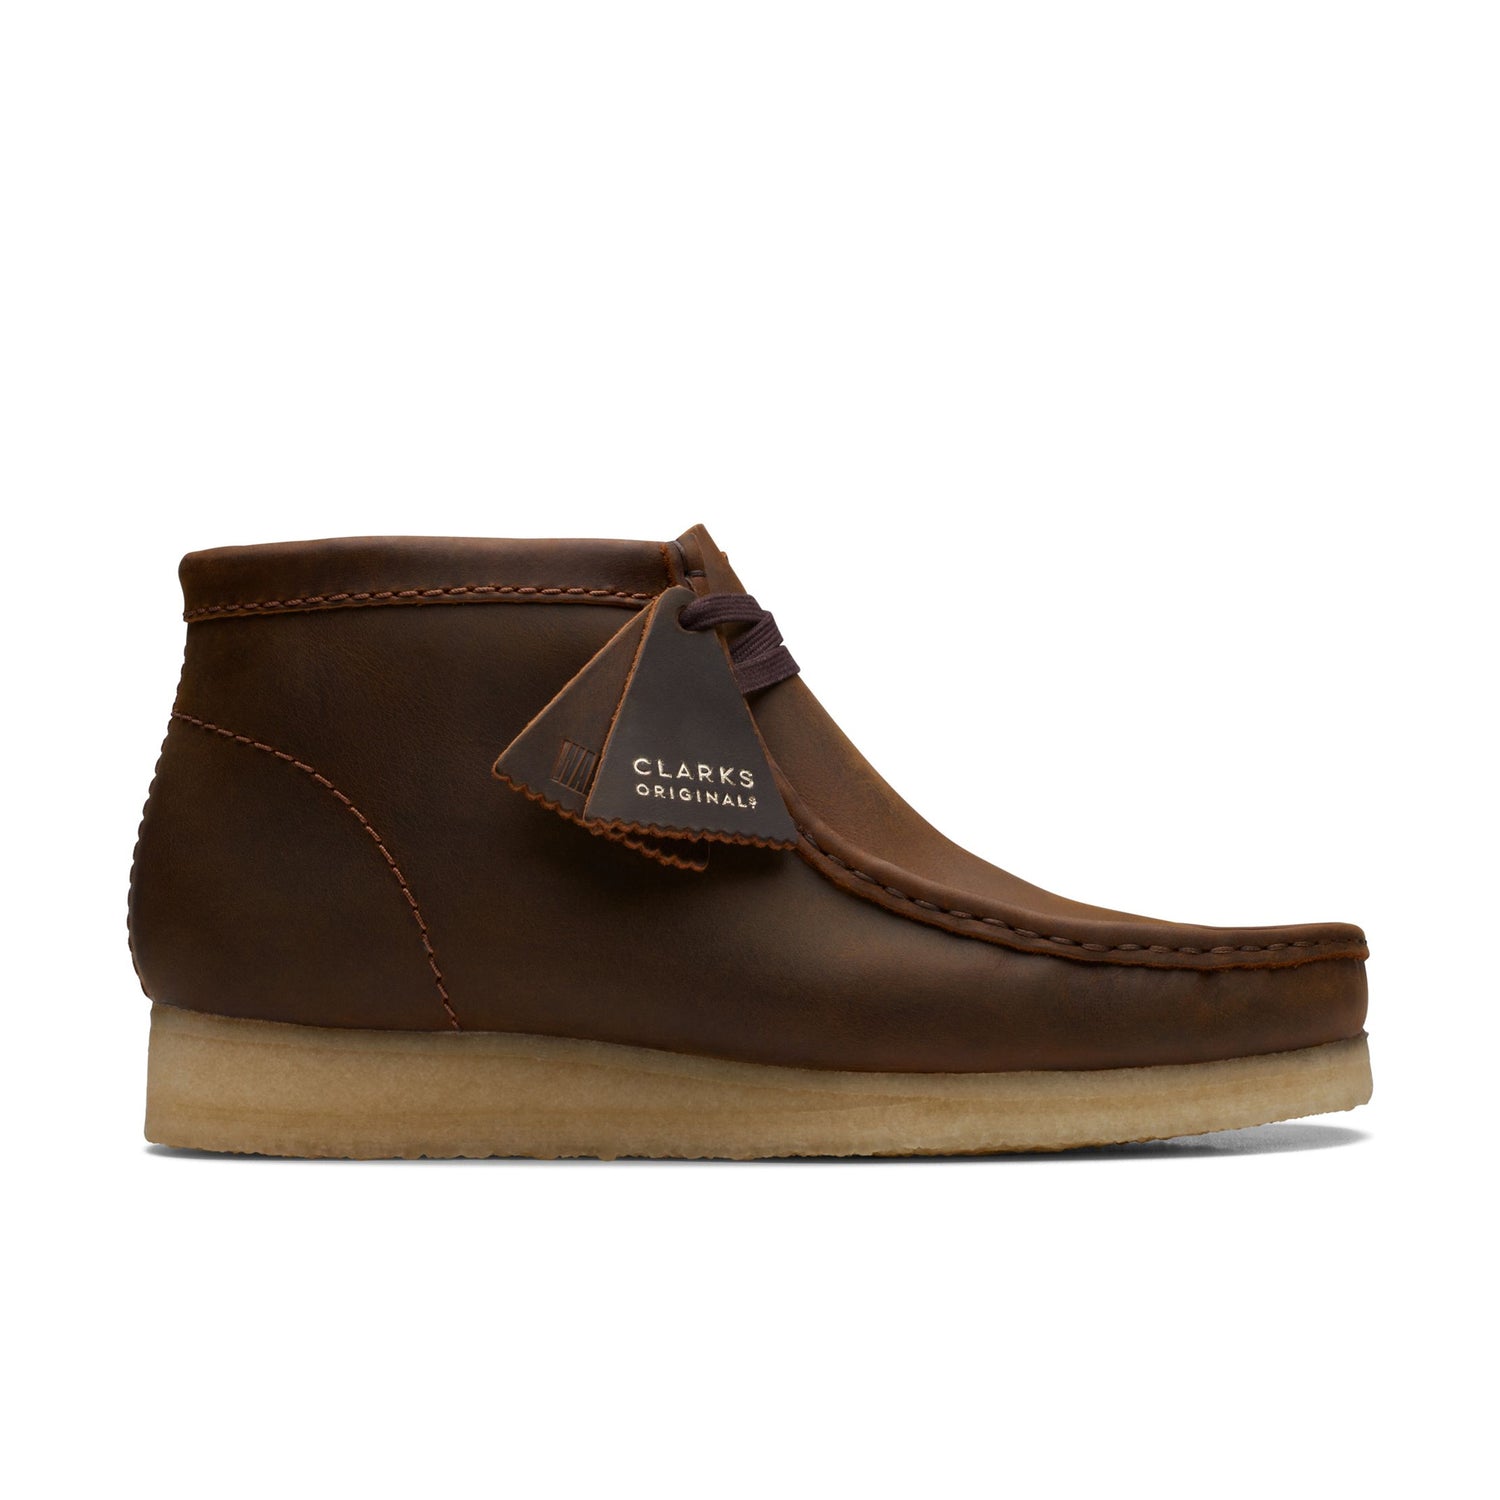 WALLABE BOOT BEESWAX